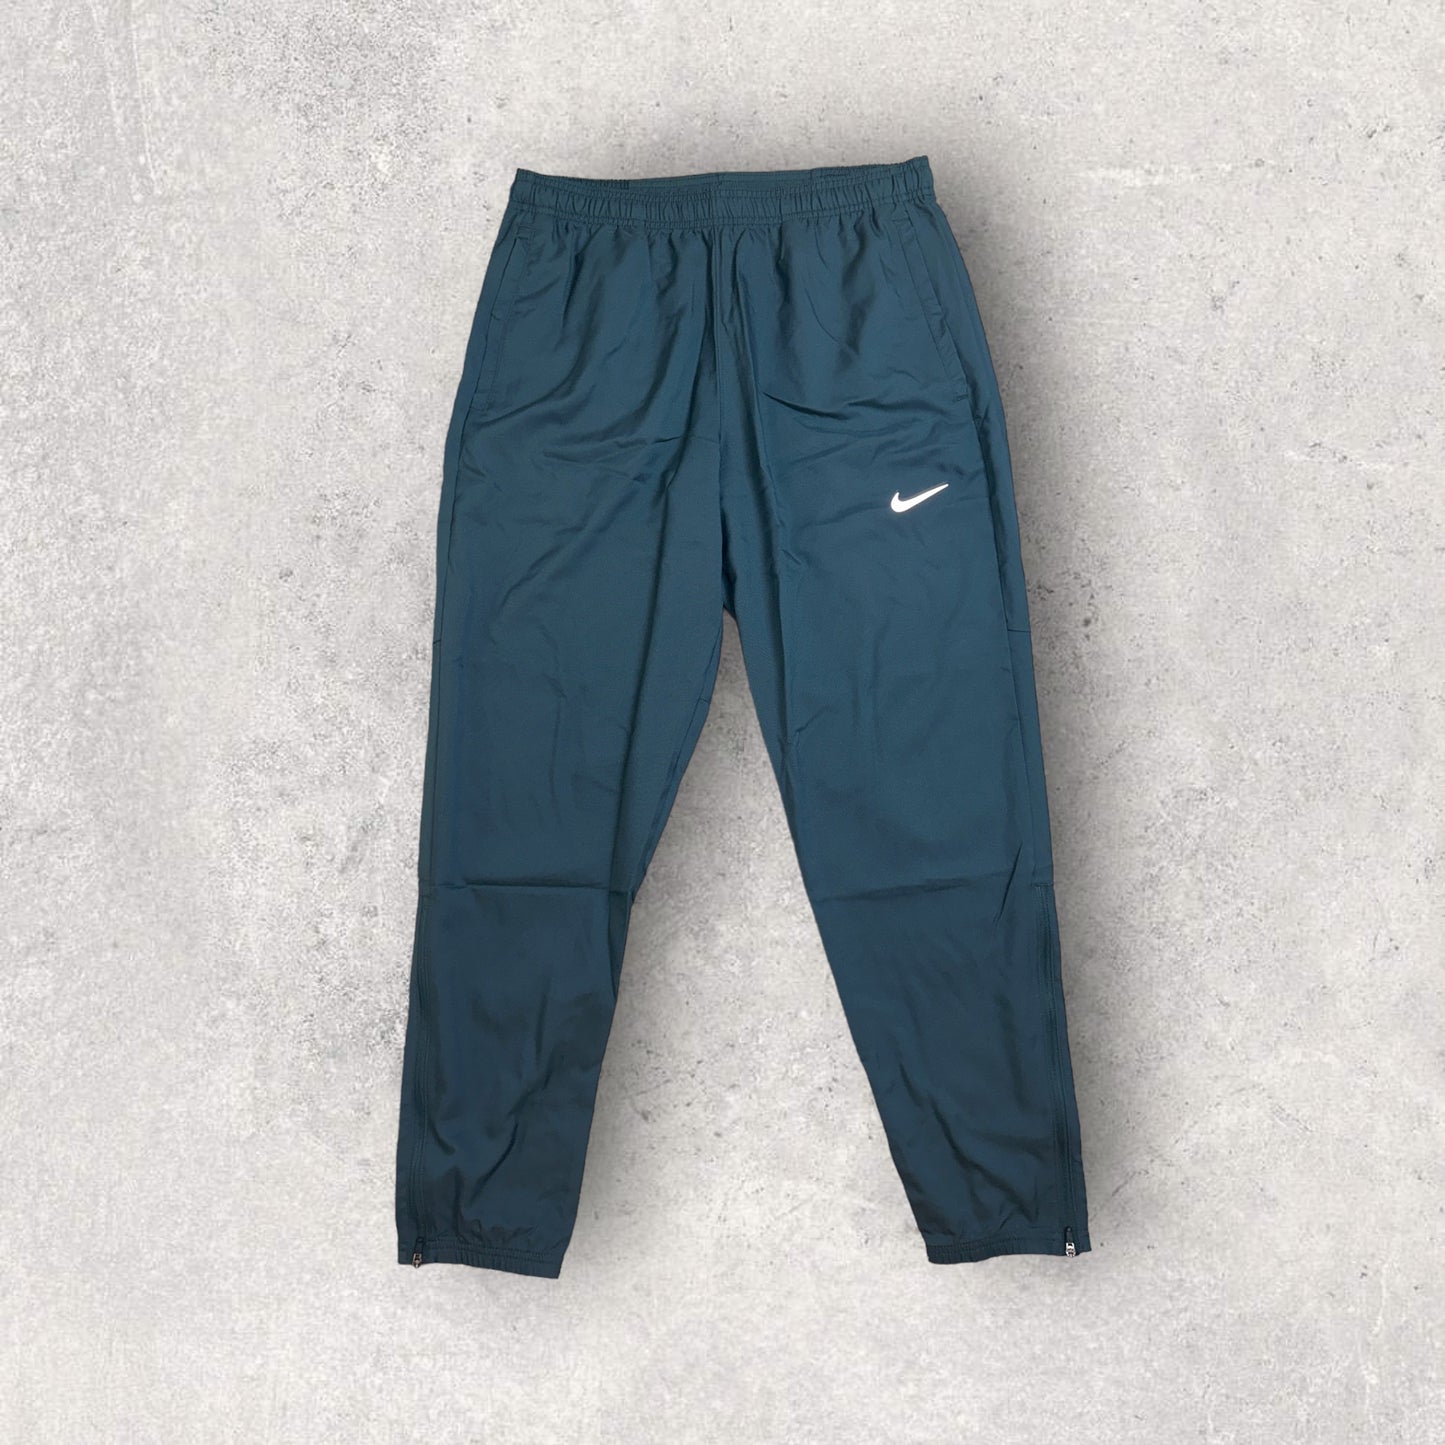 NIKE DRI-FIT CHALLENGER RUNNING JOGGERS